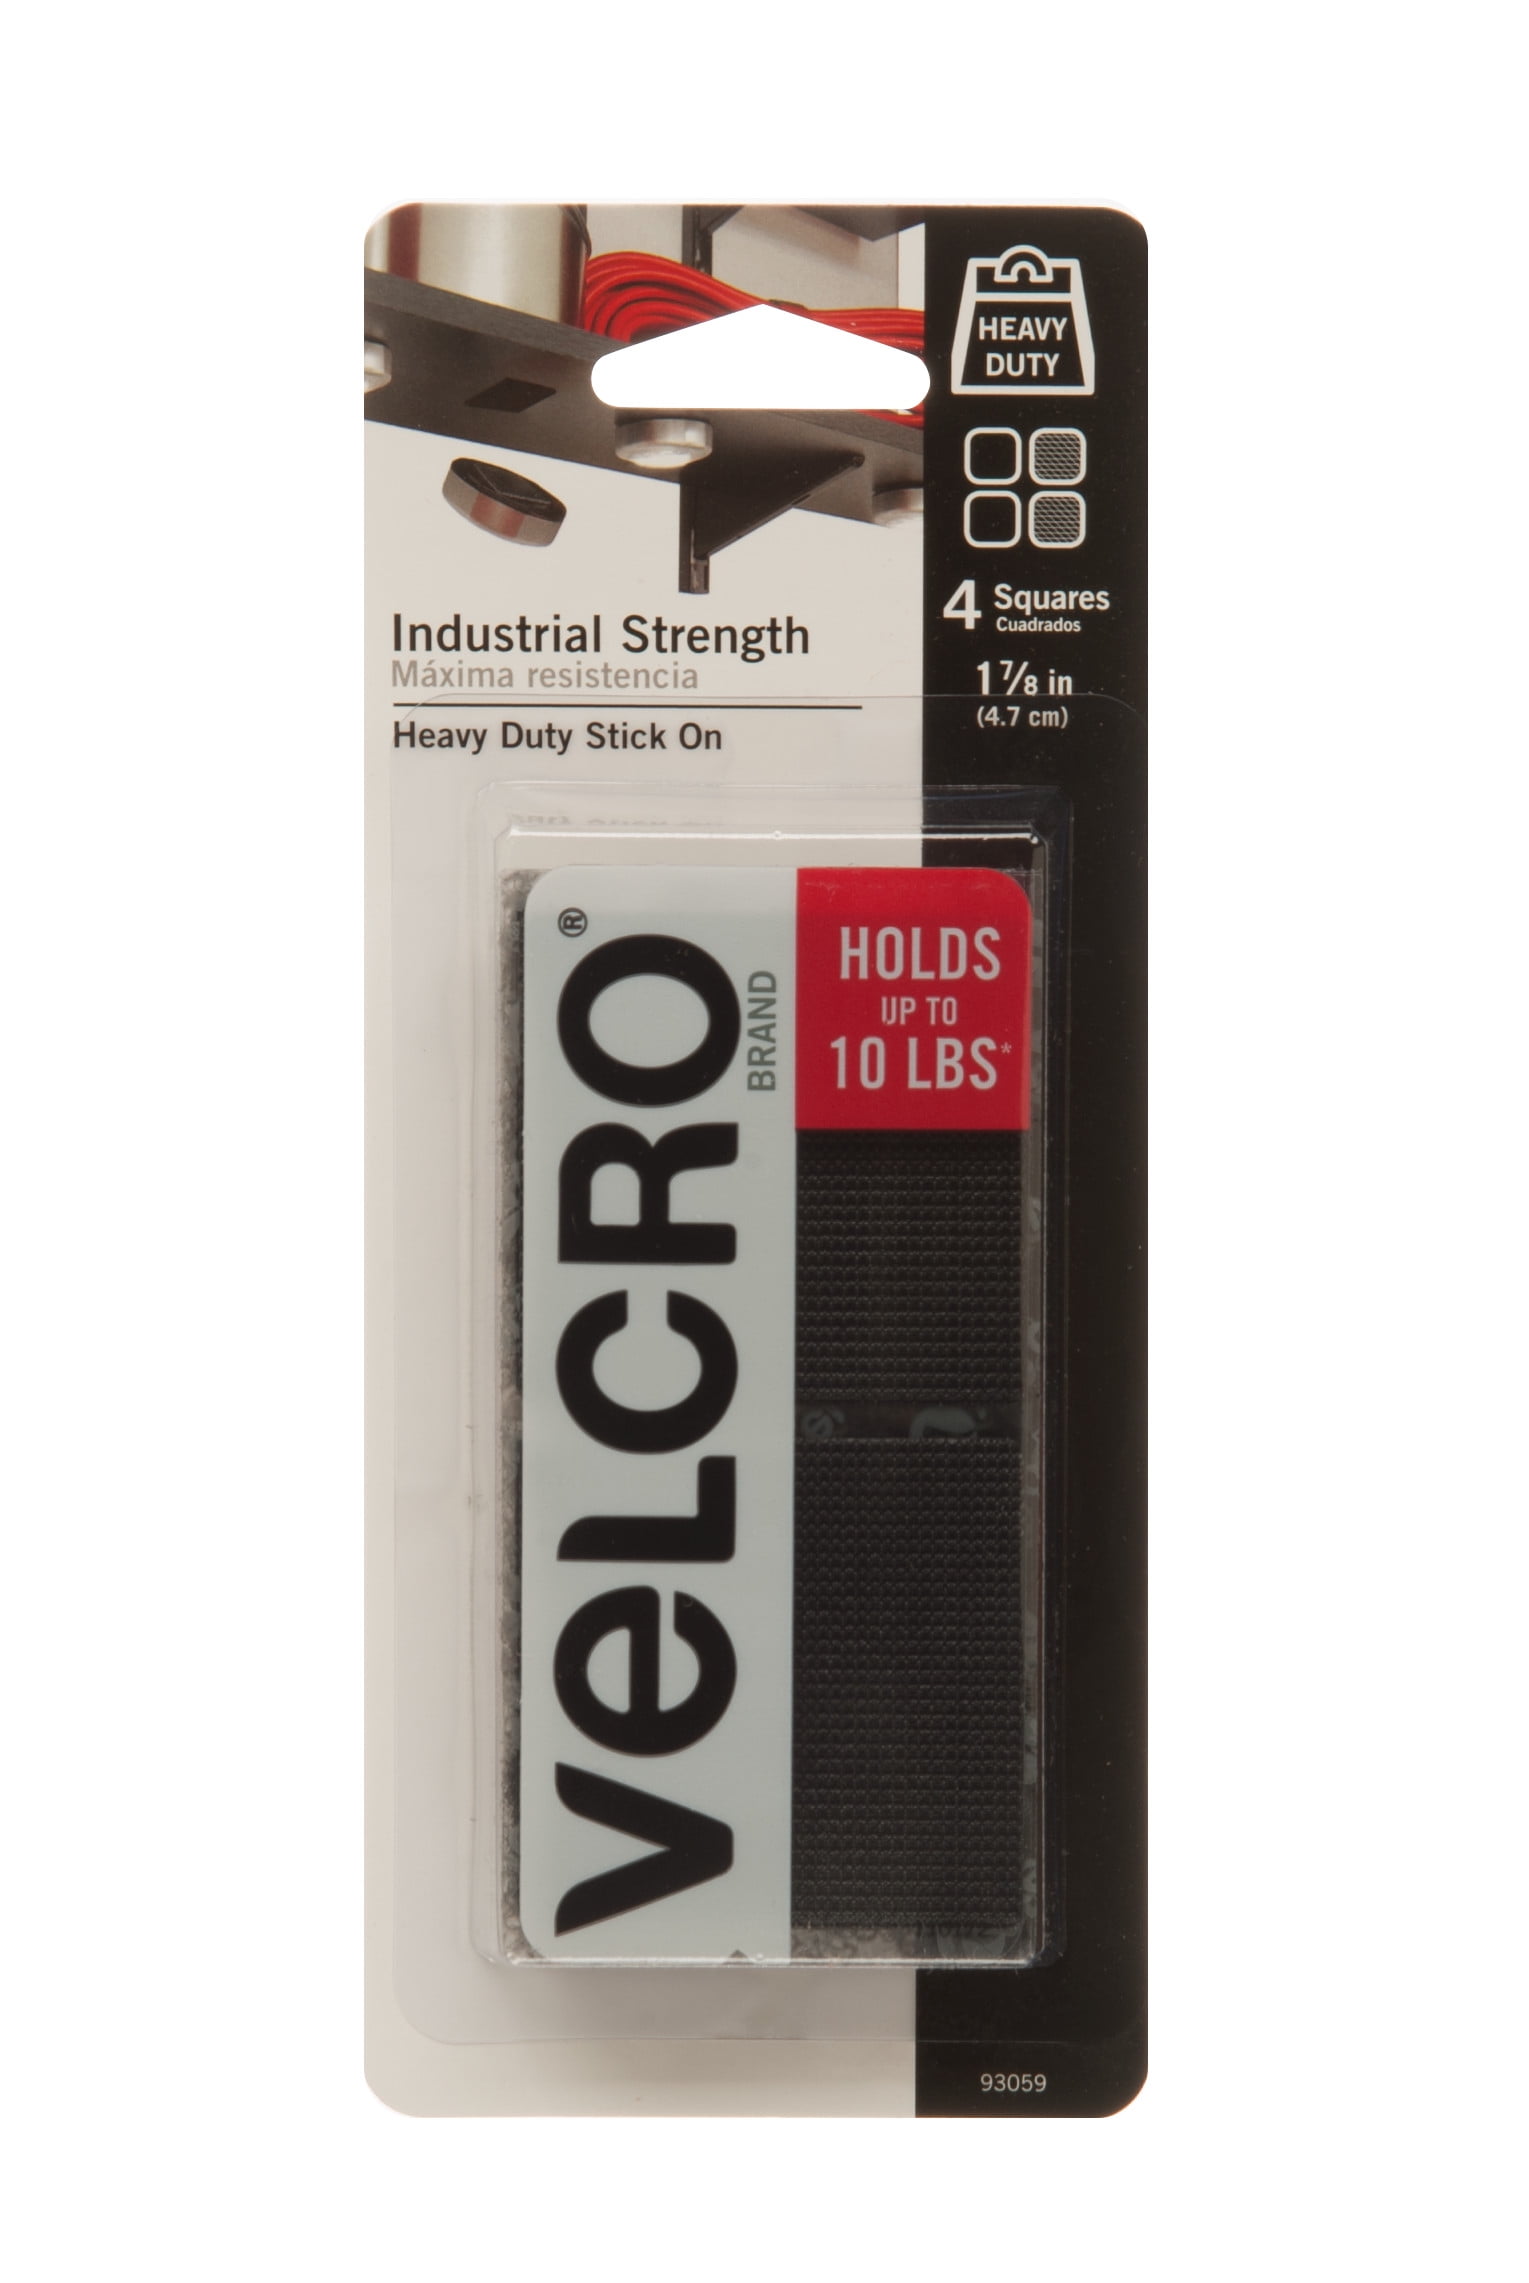 Velcro Thin Clear 18" x 3/4" Strip Sticky Fastener Tape Hook & Loop NEW! 